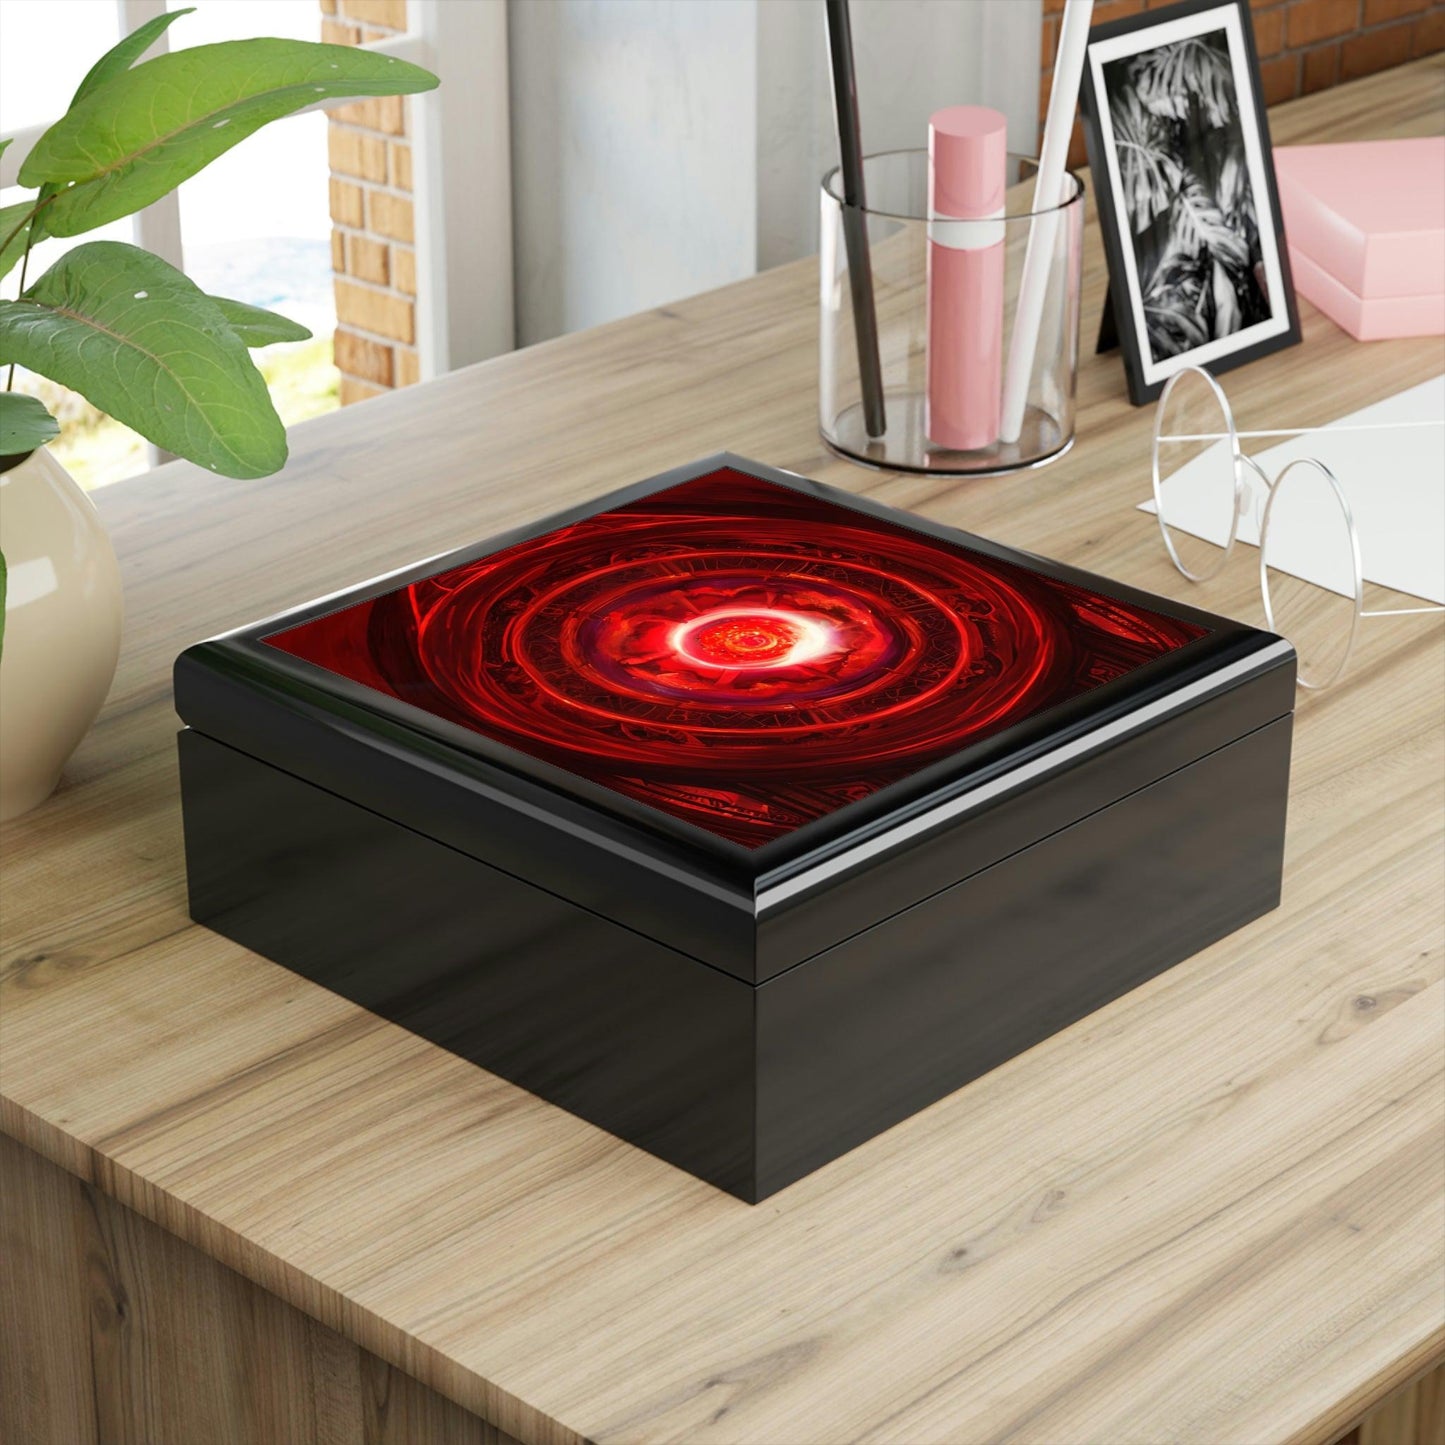 Red-Energy-Portal-Jewelry-Box-to-storing-your-talismans-and-rings